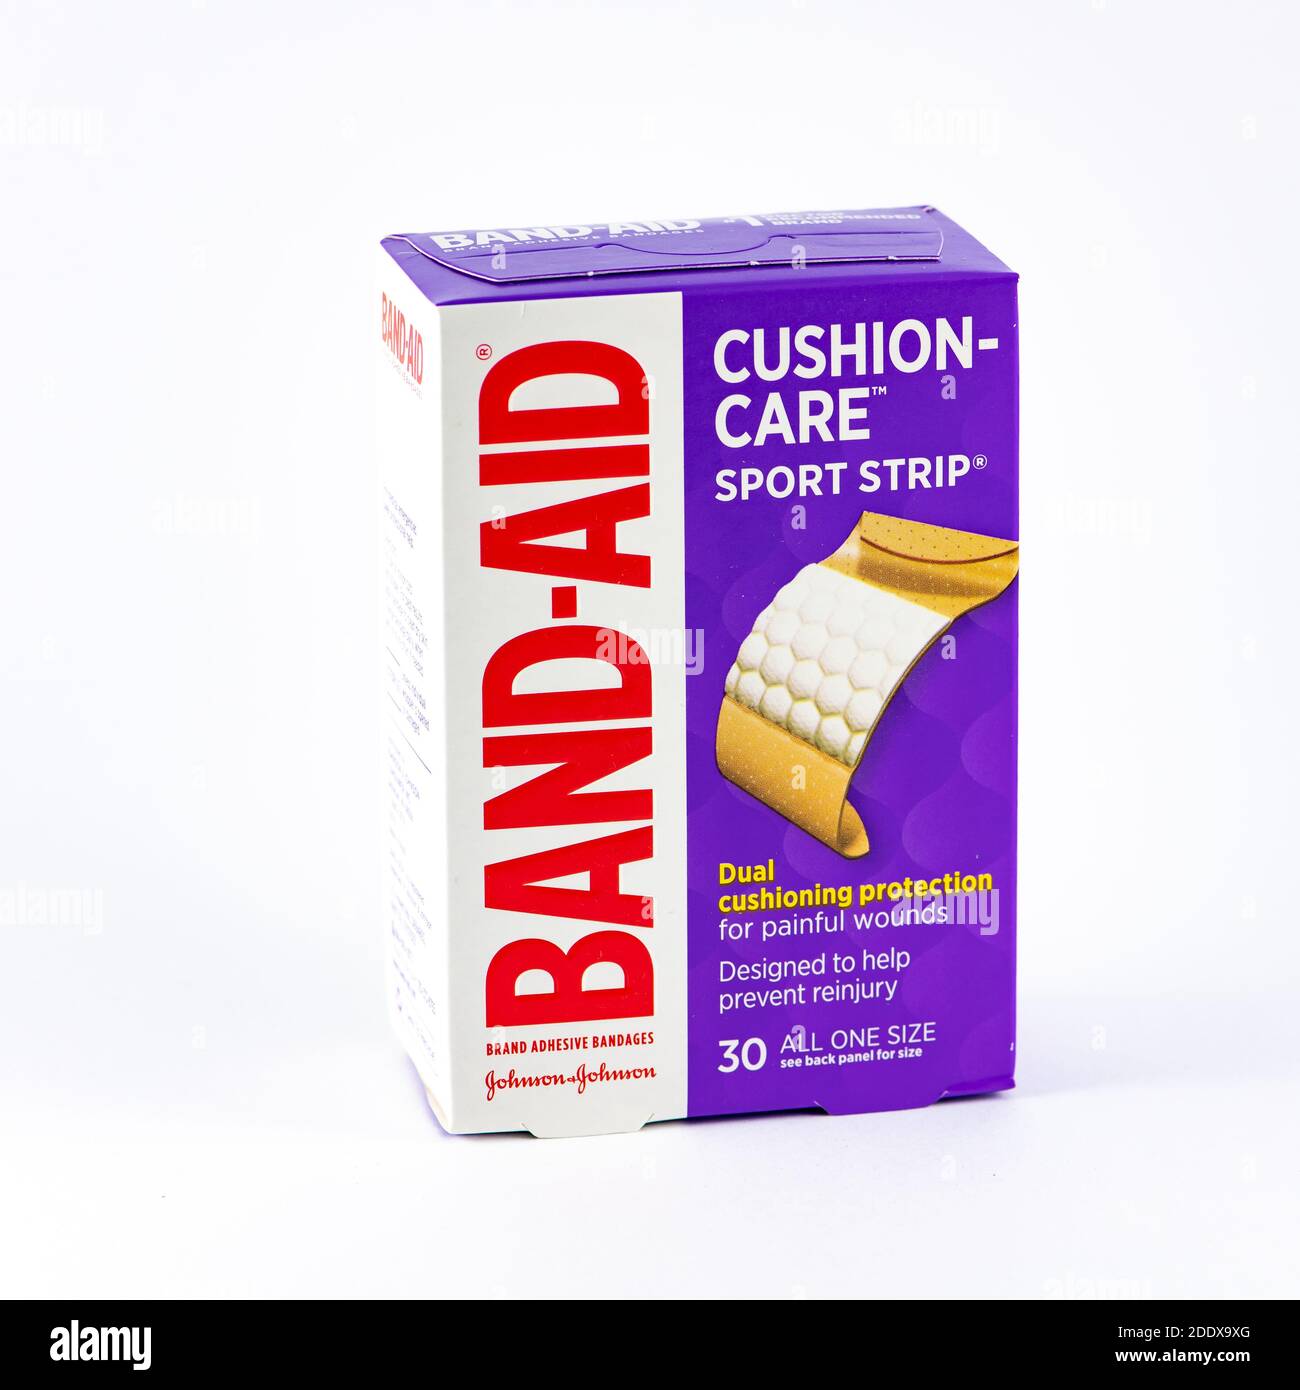 A box of Johnson & Johnson cushion care sport strip band-aids for painful wounds. Stock Photo